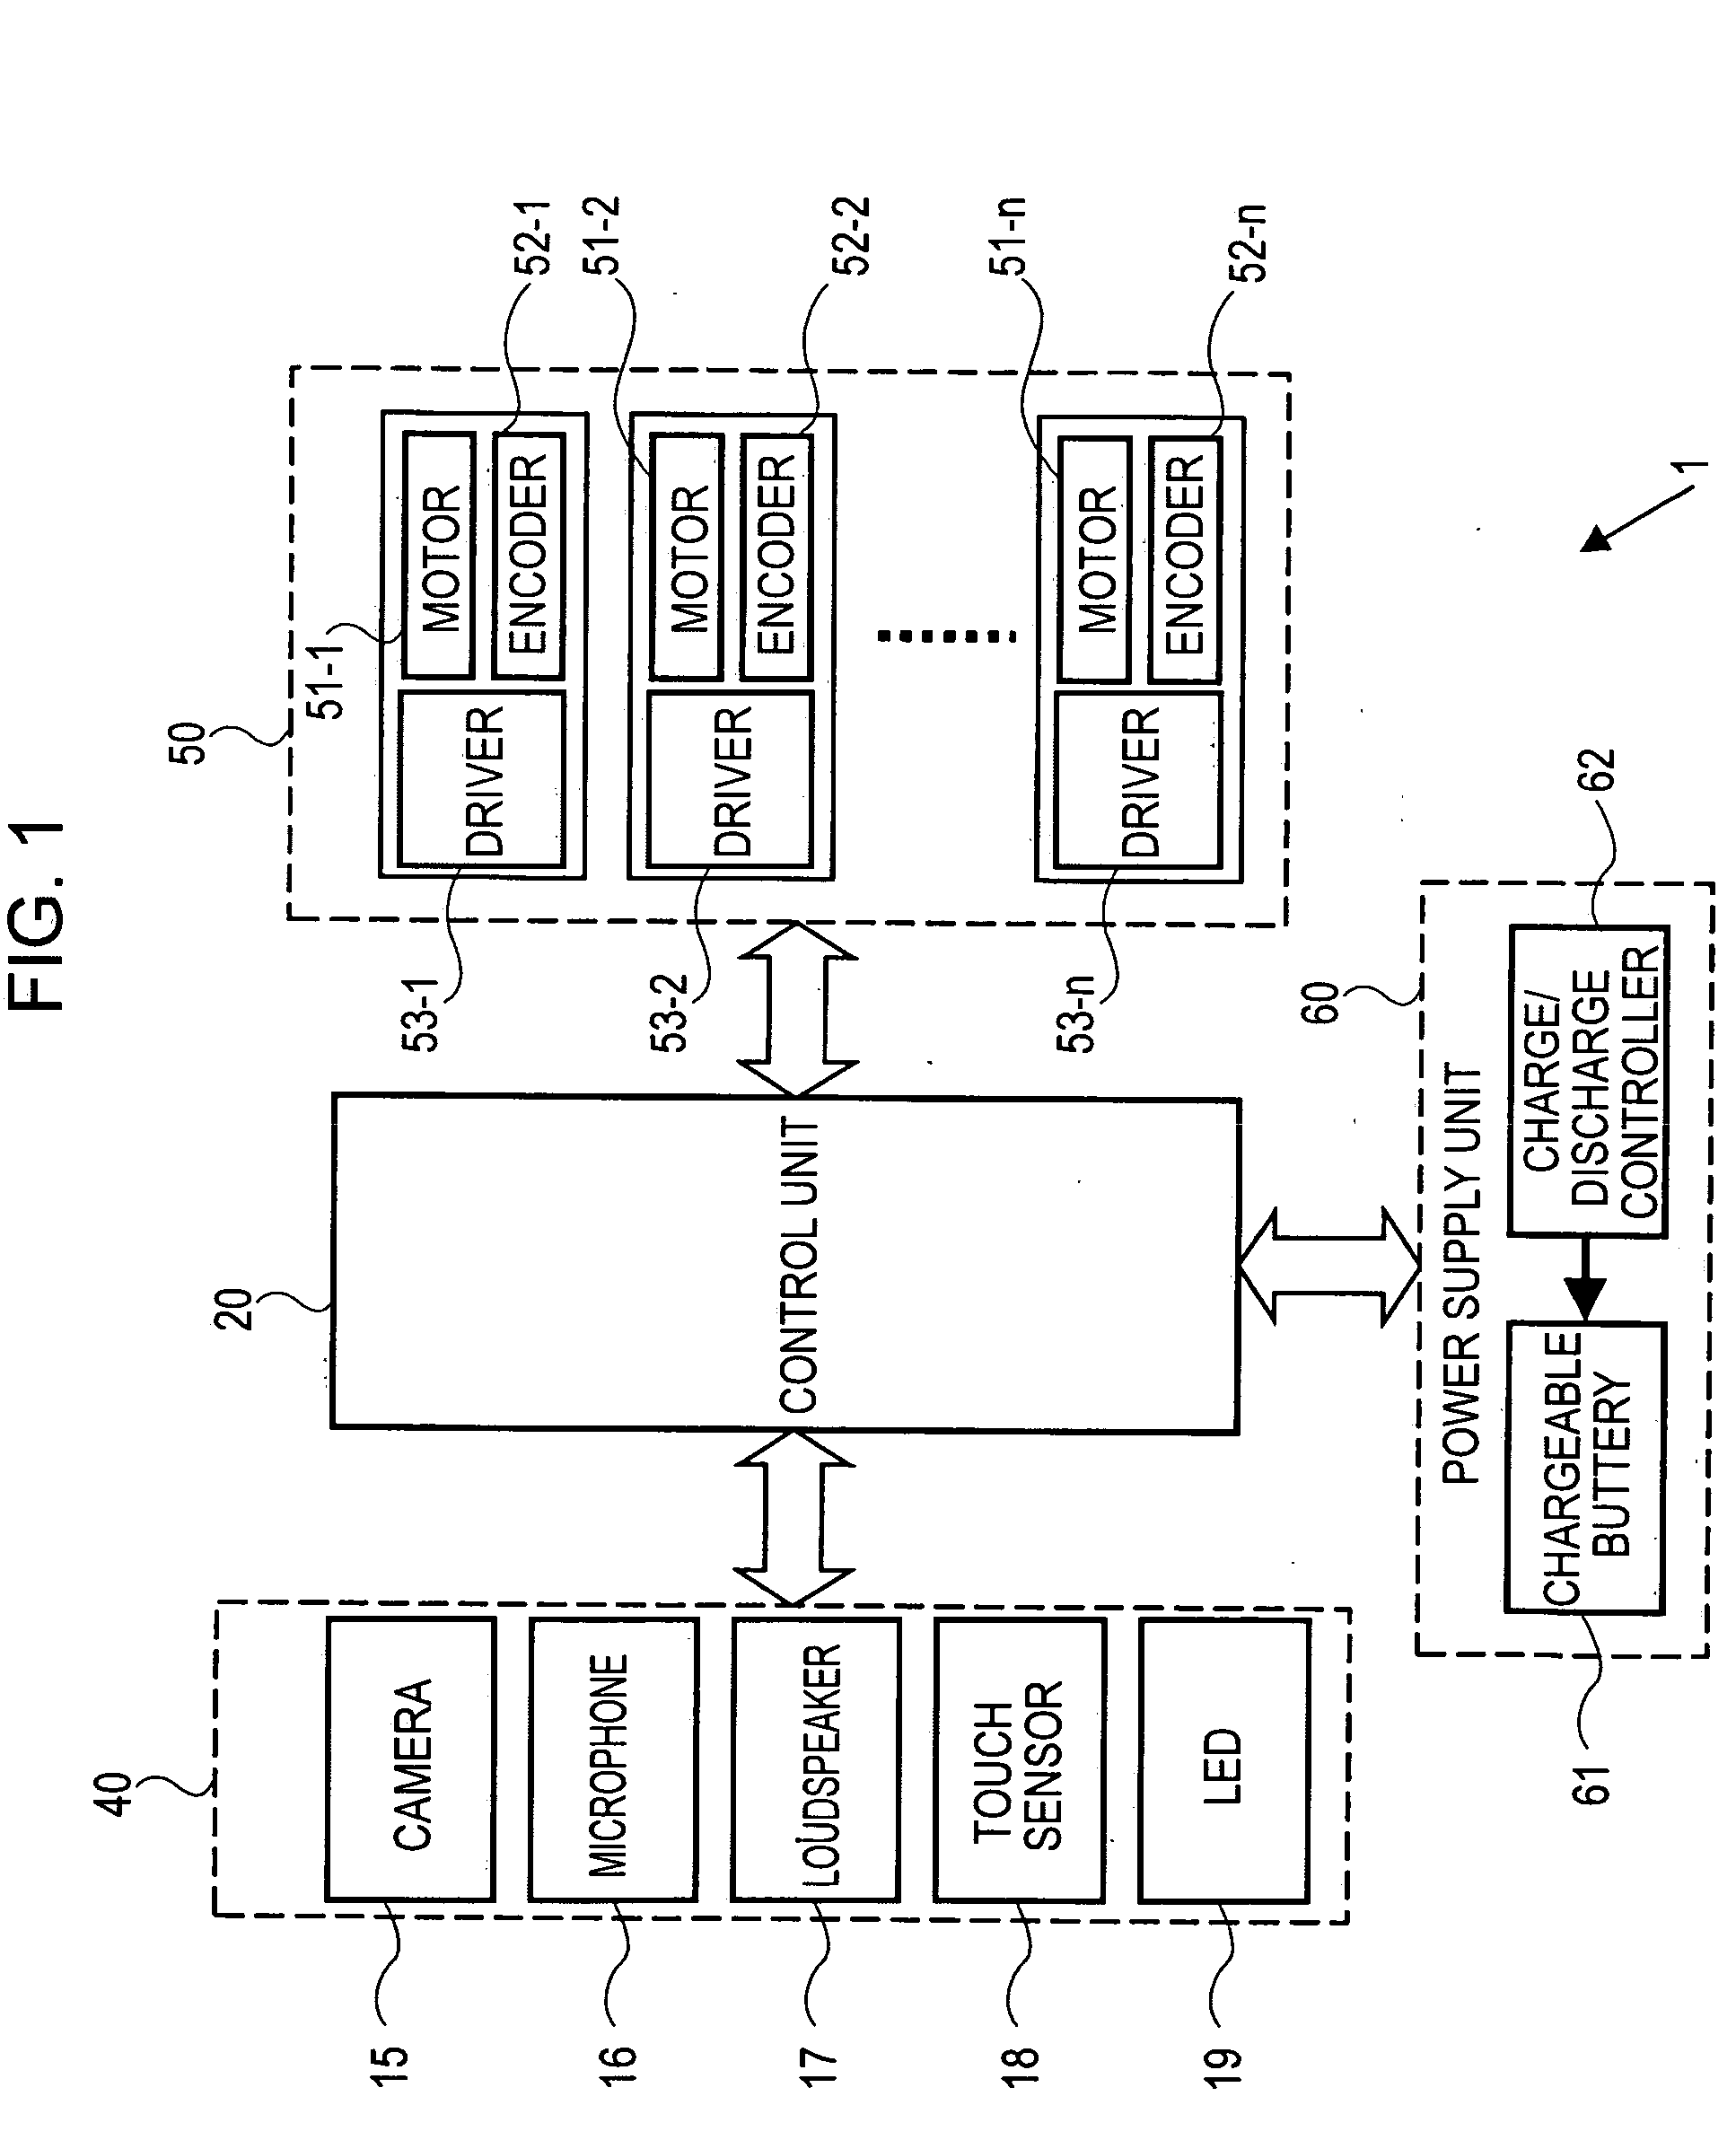 Robot behavior control system and method, and robot apparatus